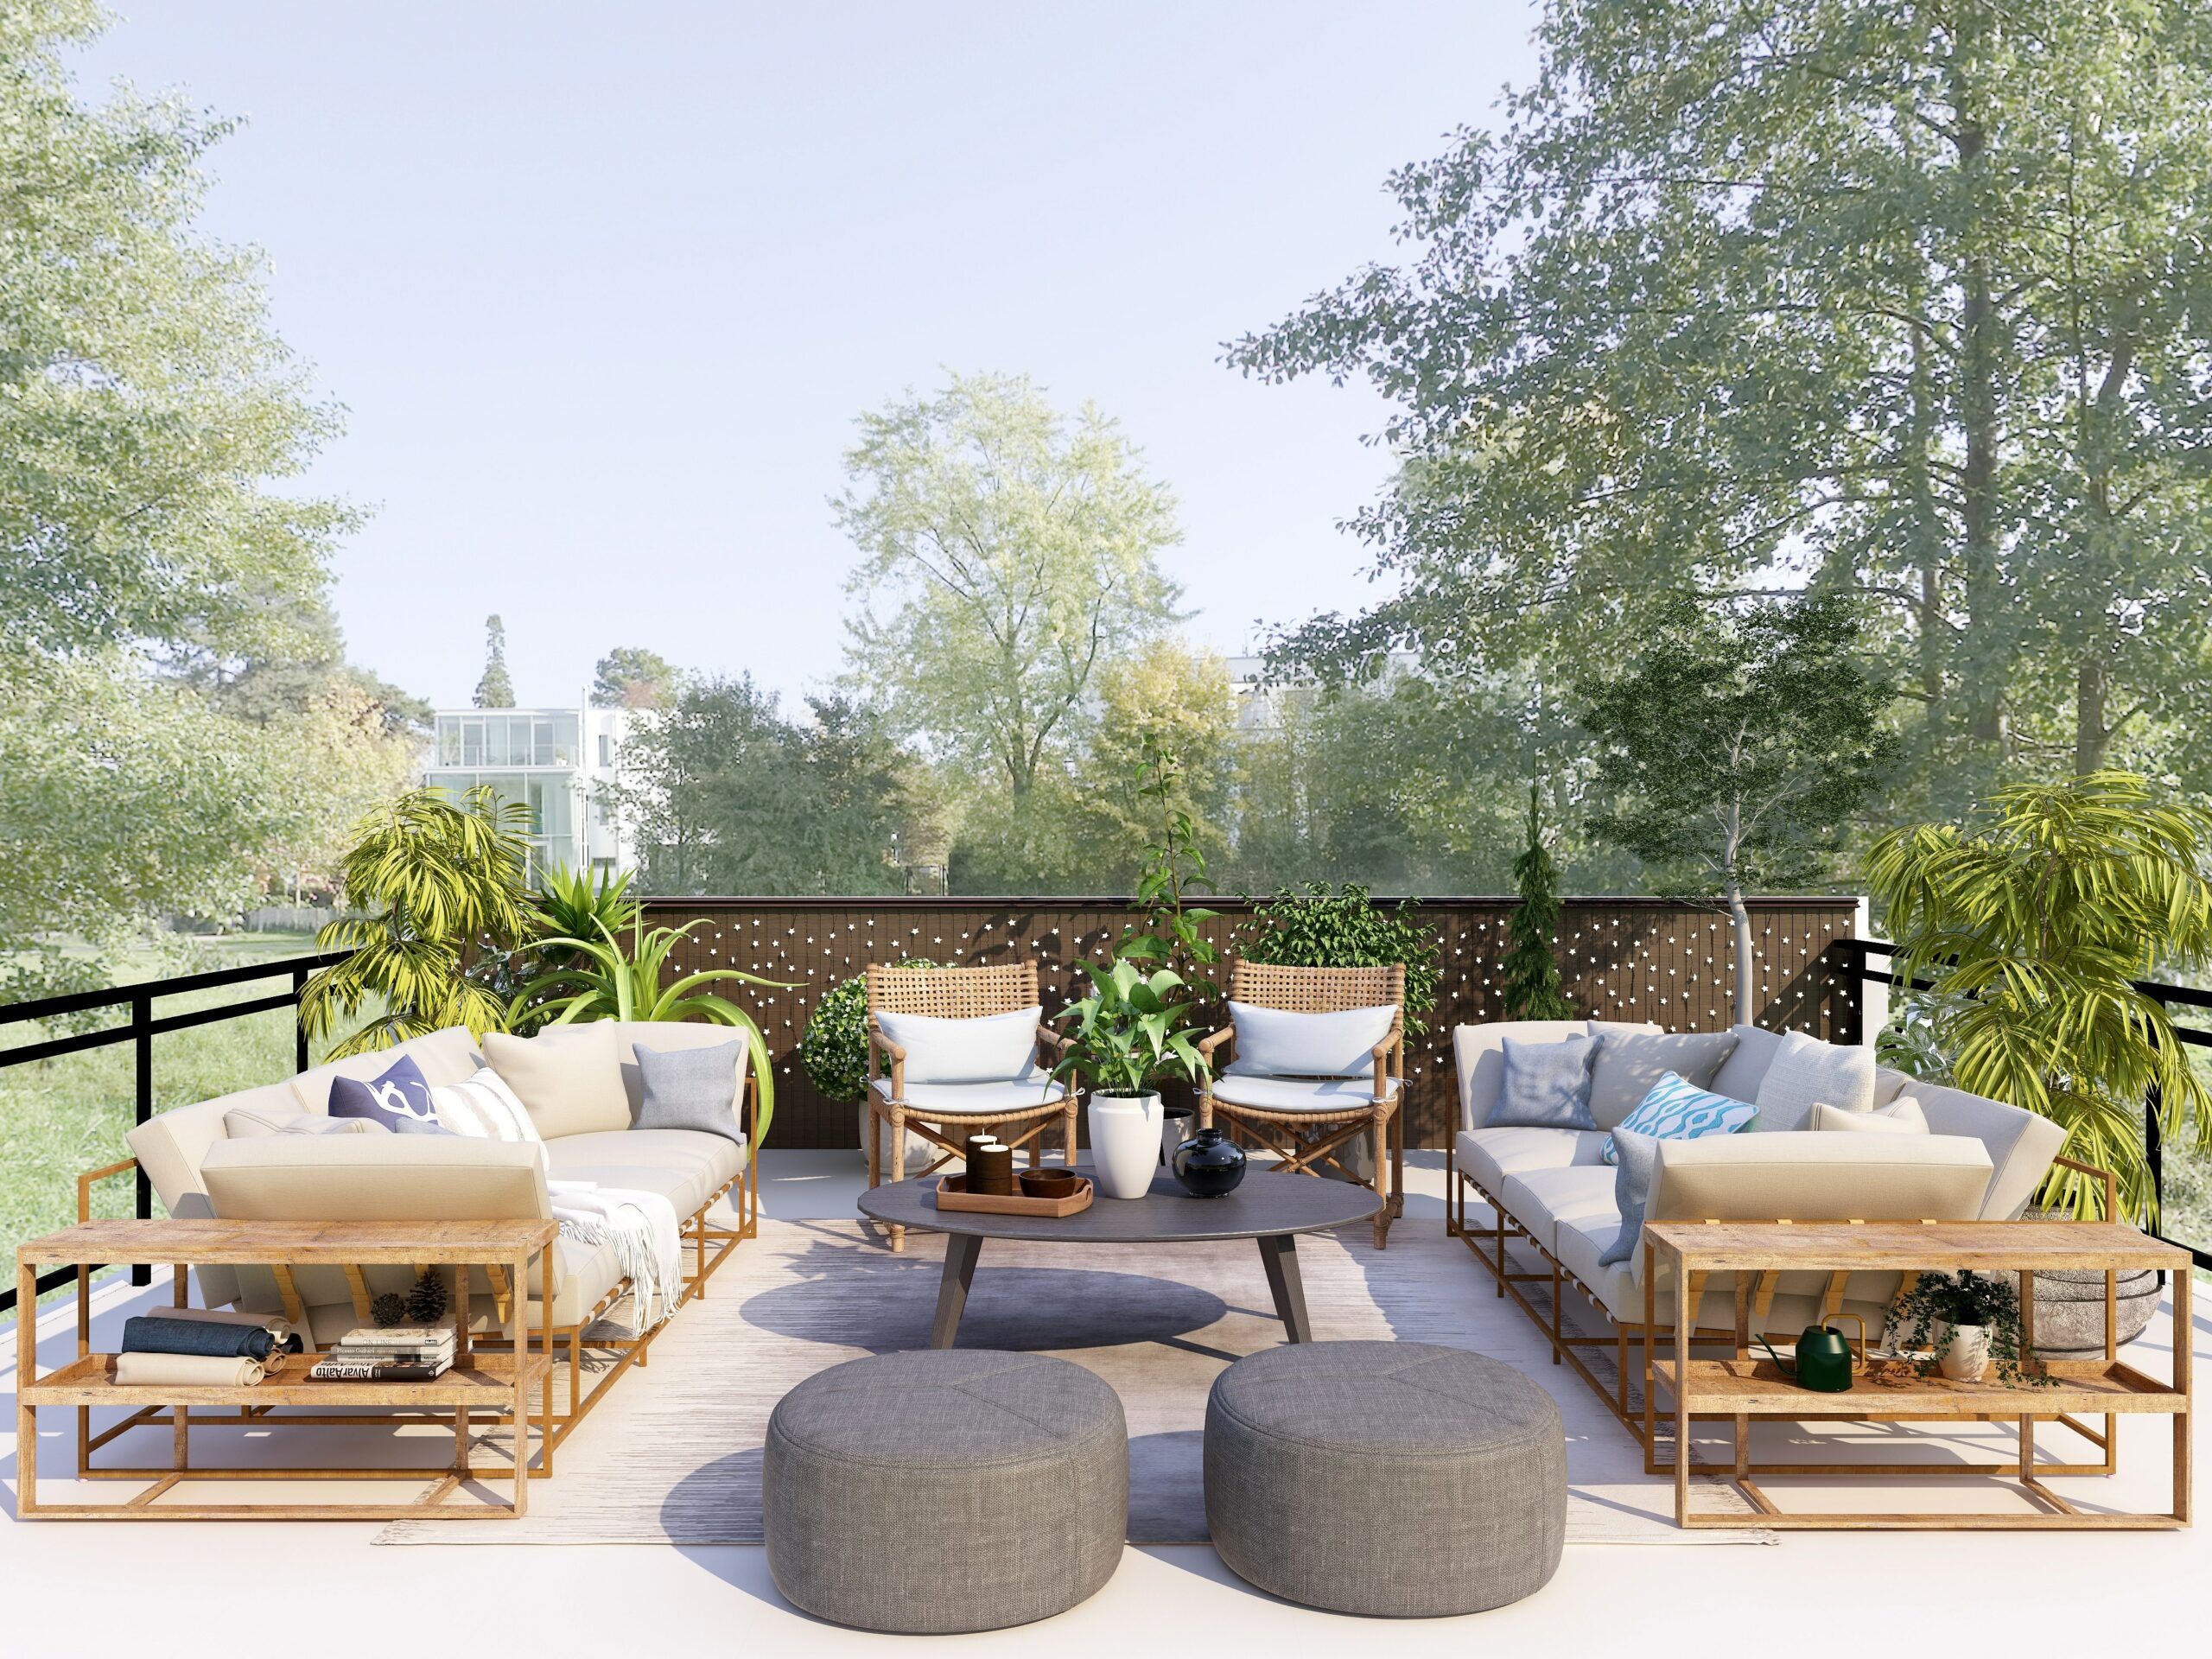 Trendy and Functional Design Ideas to Spruce Up Your Patio for Comfy Summer Out